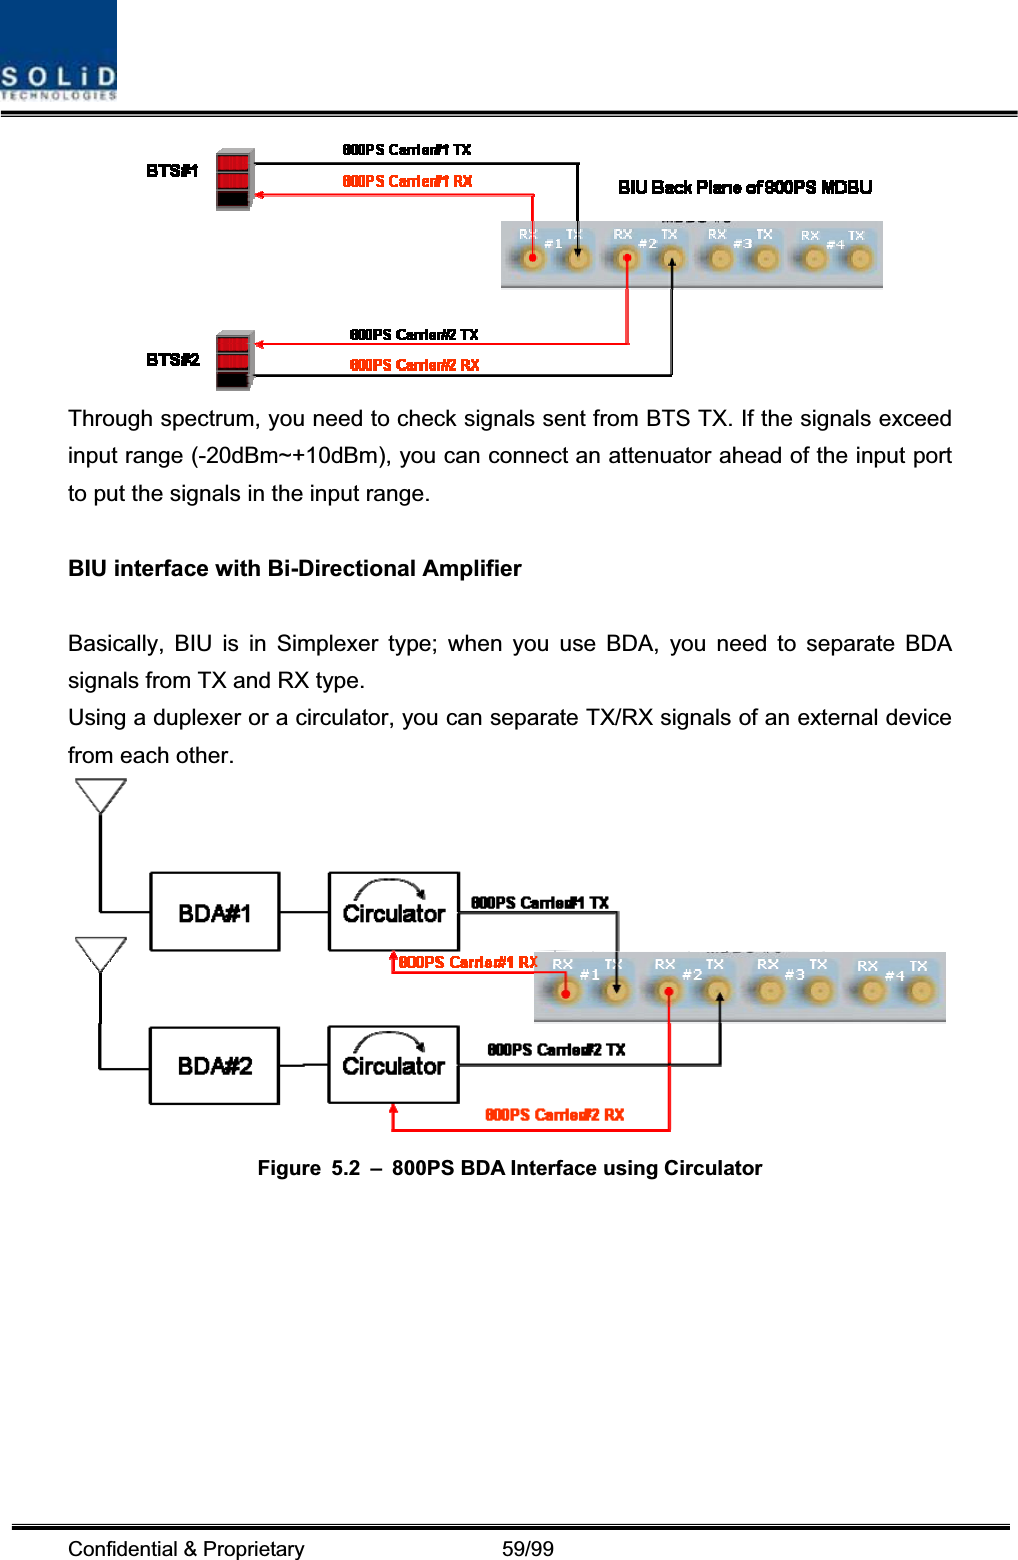 Confidential &amp; Proprietary                   59/99 Through spectrum, you need to check signals sent from BTS TX. If the signals exceed input range (-20dBm~+10dBm), you can connect an attenuator ahead of the input port to put the signals in the input range. BIU interface with Bi-Directional Amplifier Basically, BIU is in Simplexer type; when you use BDA, you need to separate BDA signals from TX and RX type. Using a duplexer or a circulator, you can separate TX/RX signals of an external device from each other. Figure  5.2  –  800PS BDA Interface using Circulator 